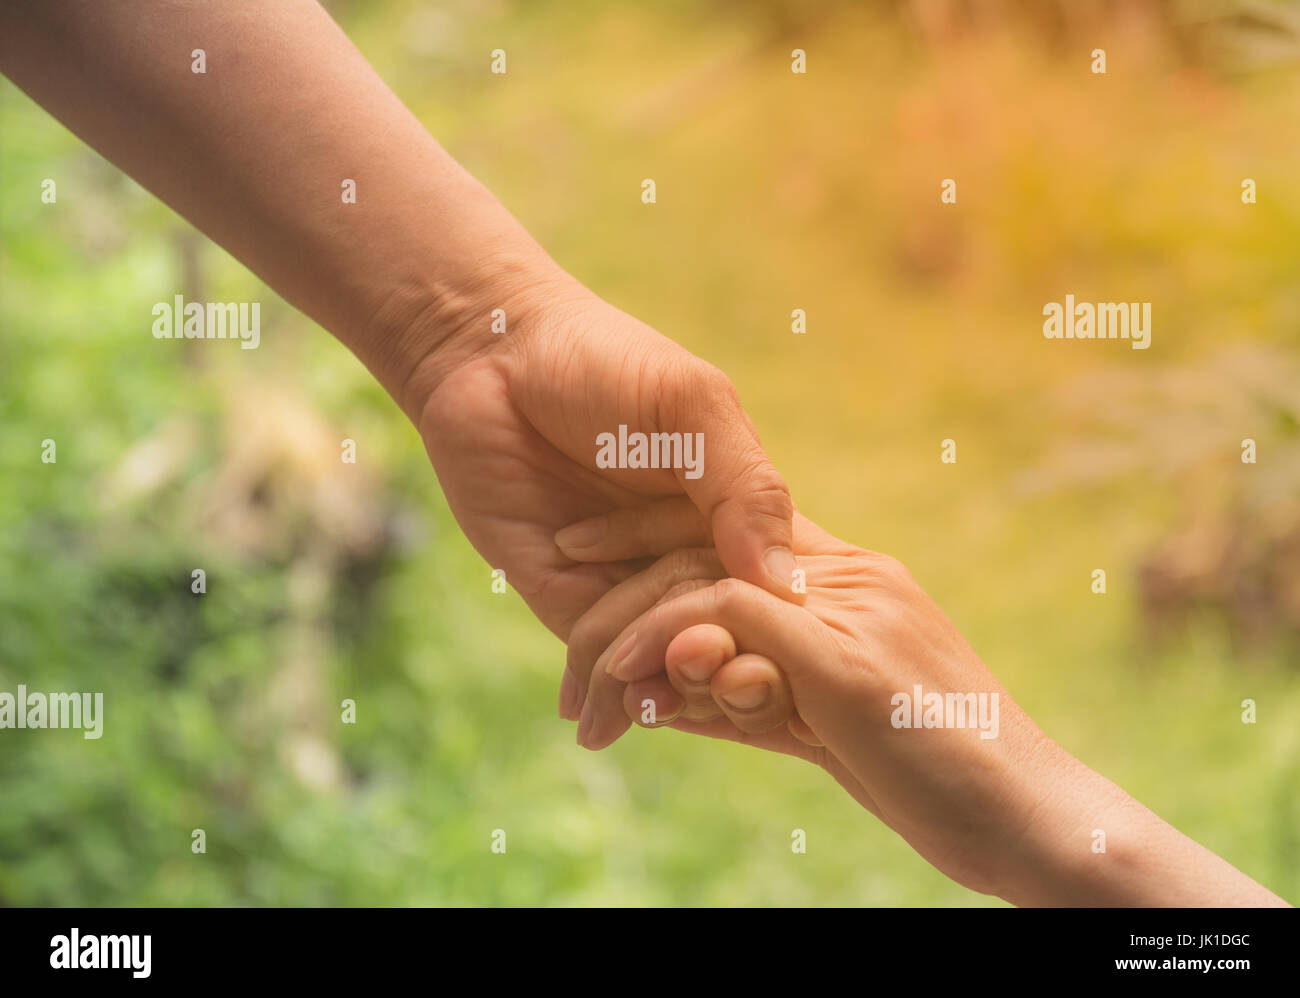 Two pairs of hand touch together, helping hands concept. Helping hand outstretched for help. Stock Photo